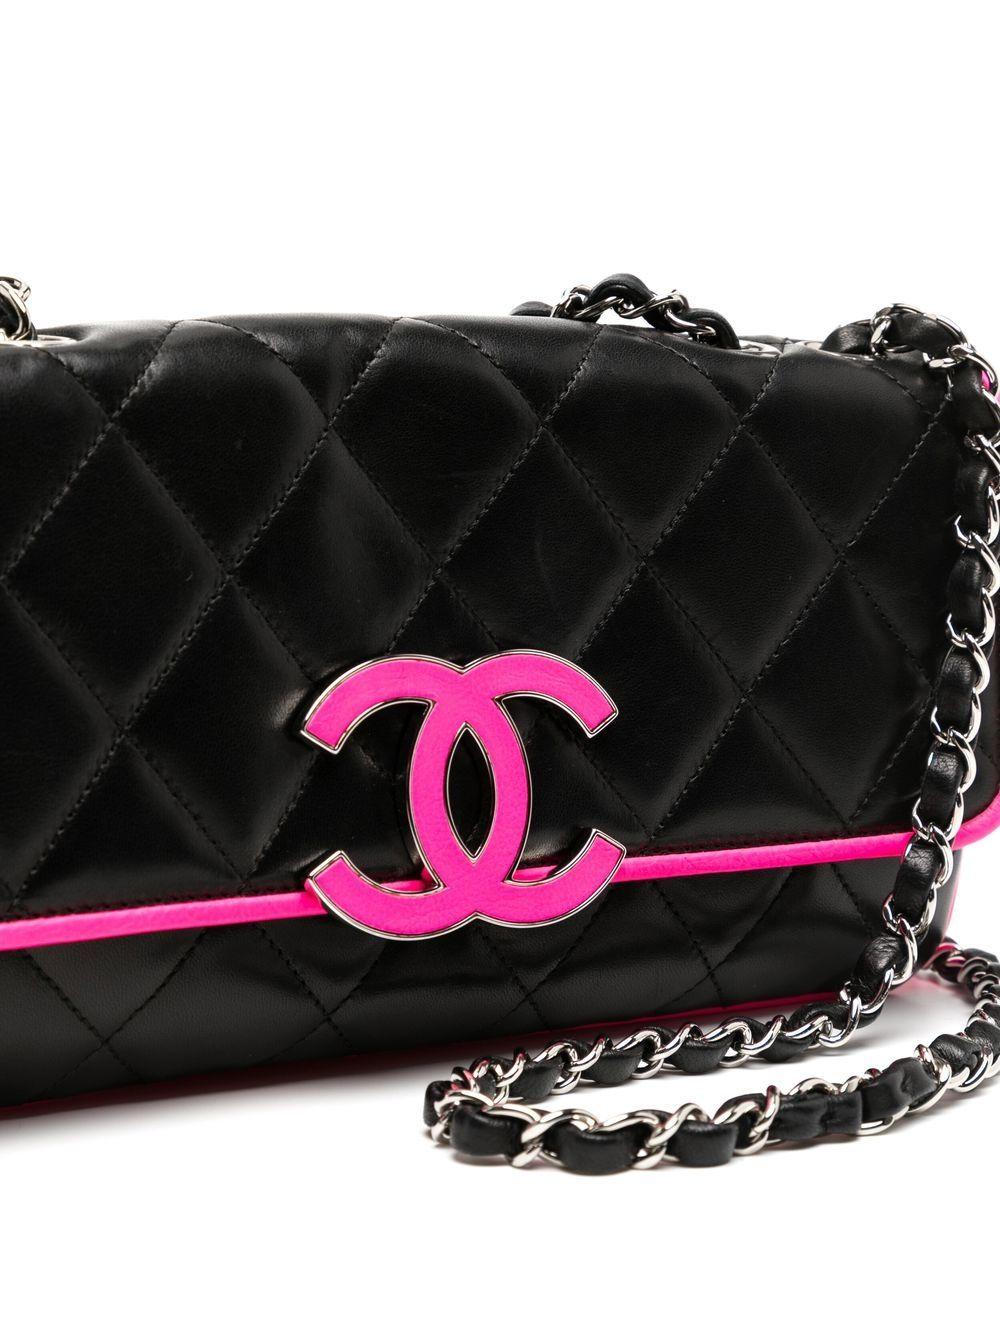 Chanel 2008 Cruise Black Pink Small Medium Logo Accordion Classic Flap Bag  For Sale 2